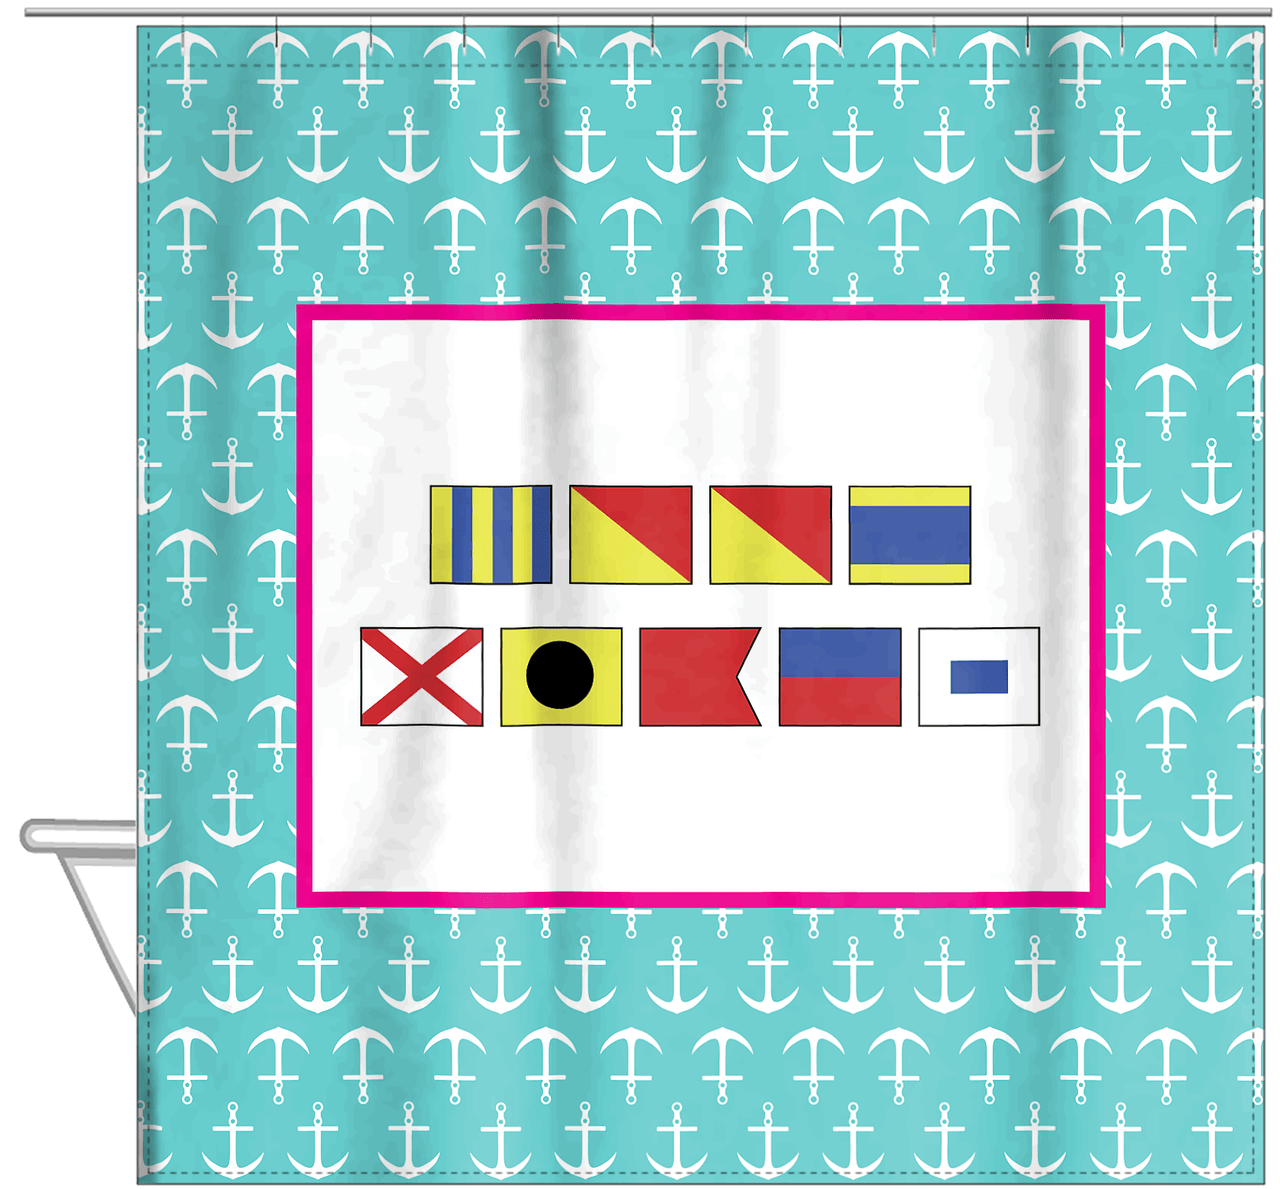 Personalized Nautical Flags Shower Curtain with Anchors - Teal and Pink - Flags without Letters - Hanging View